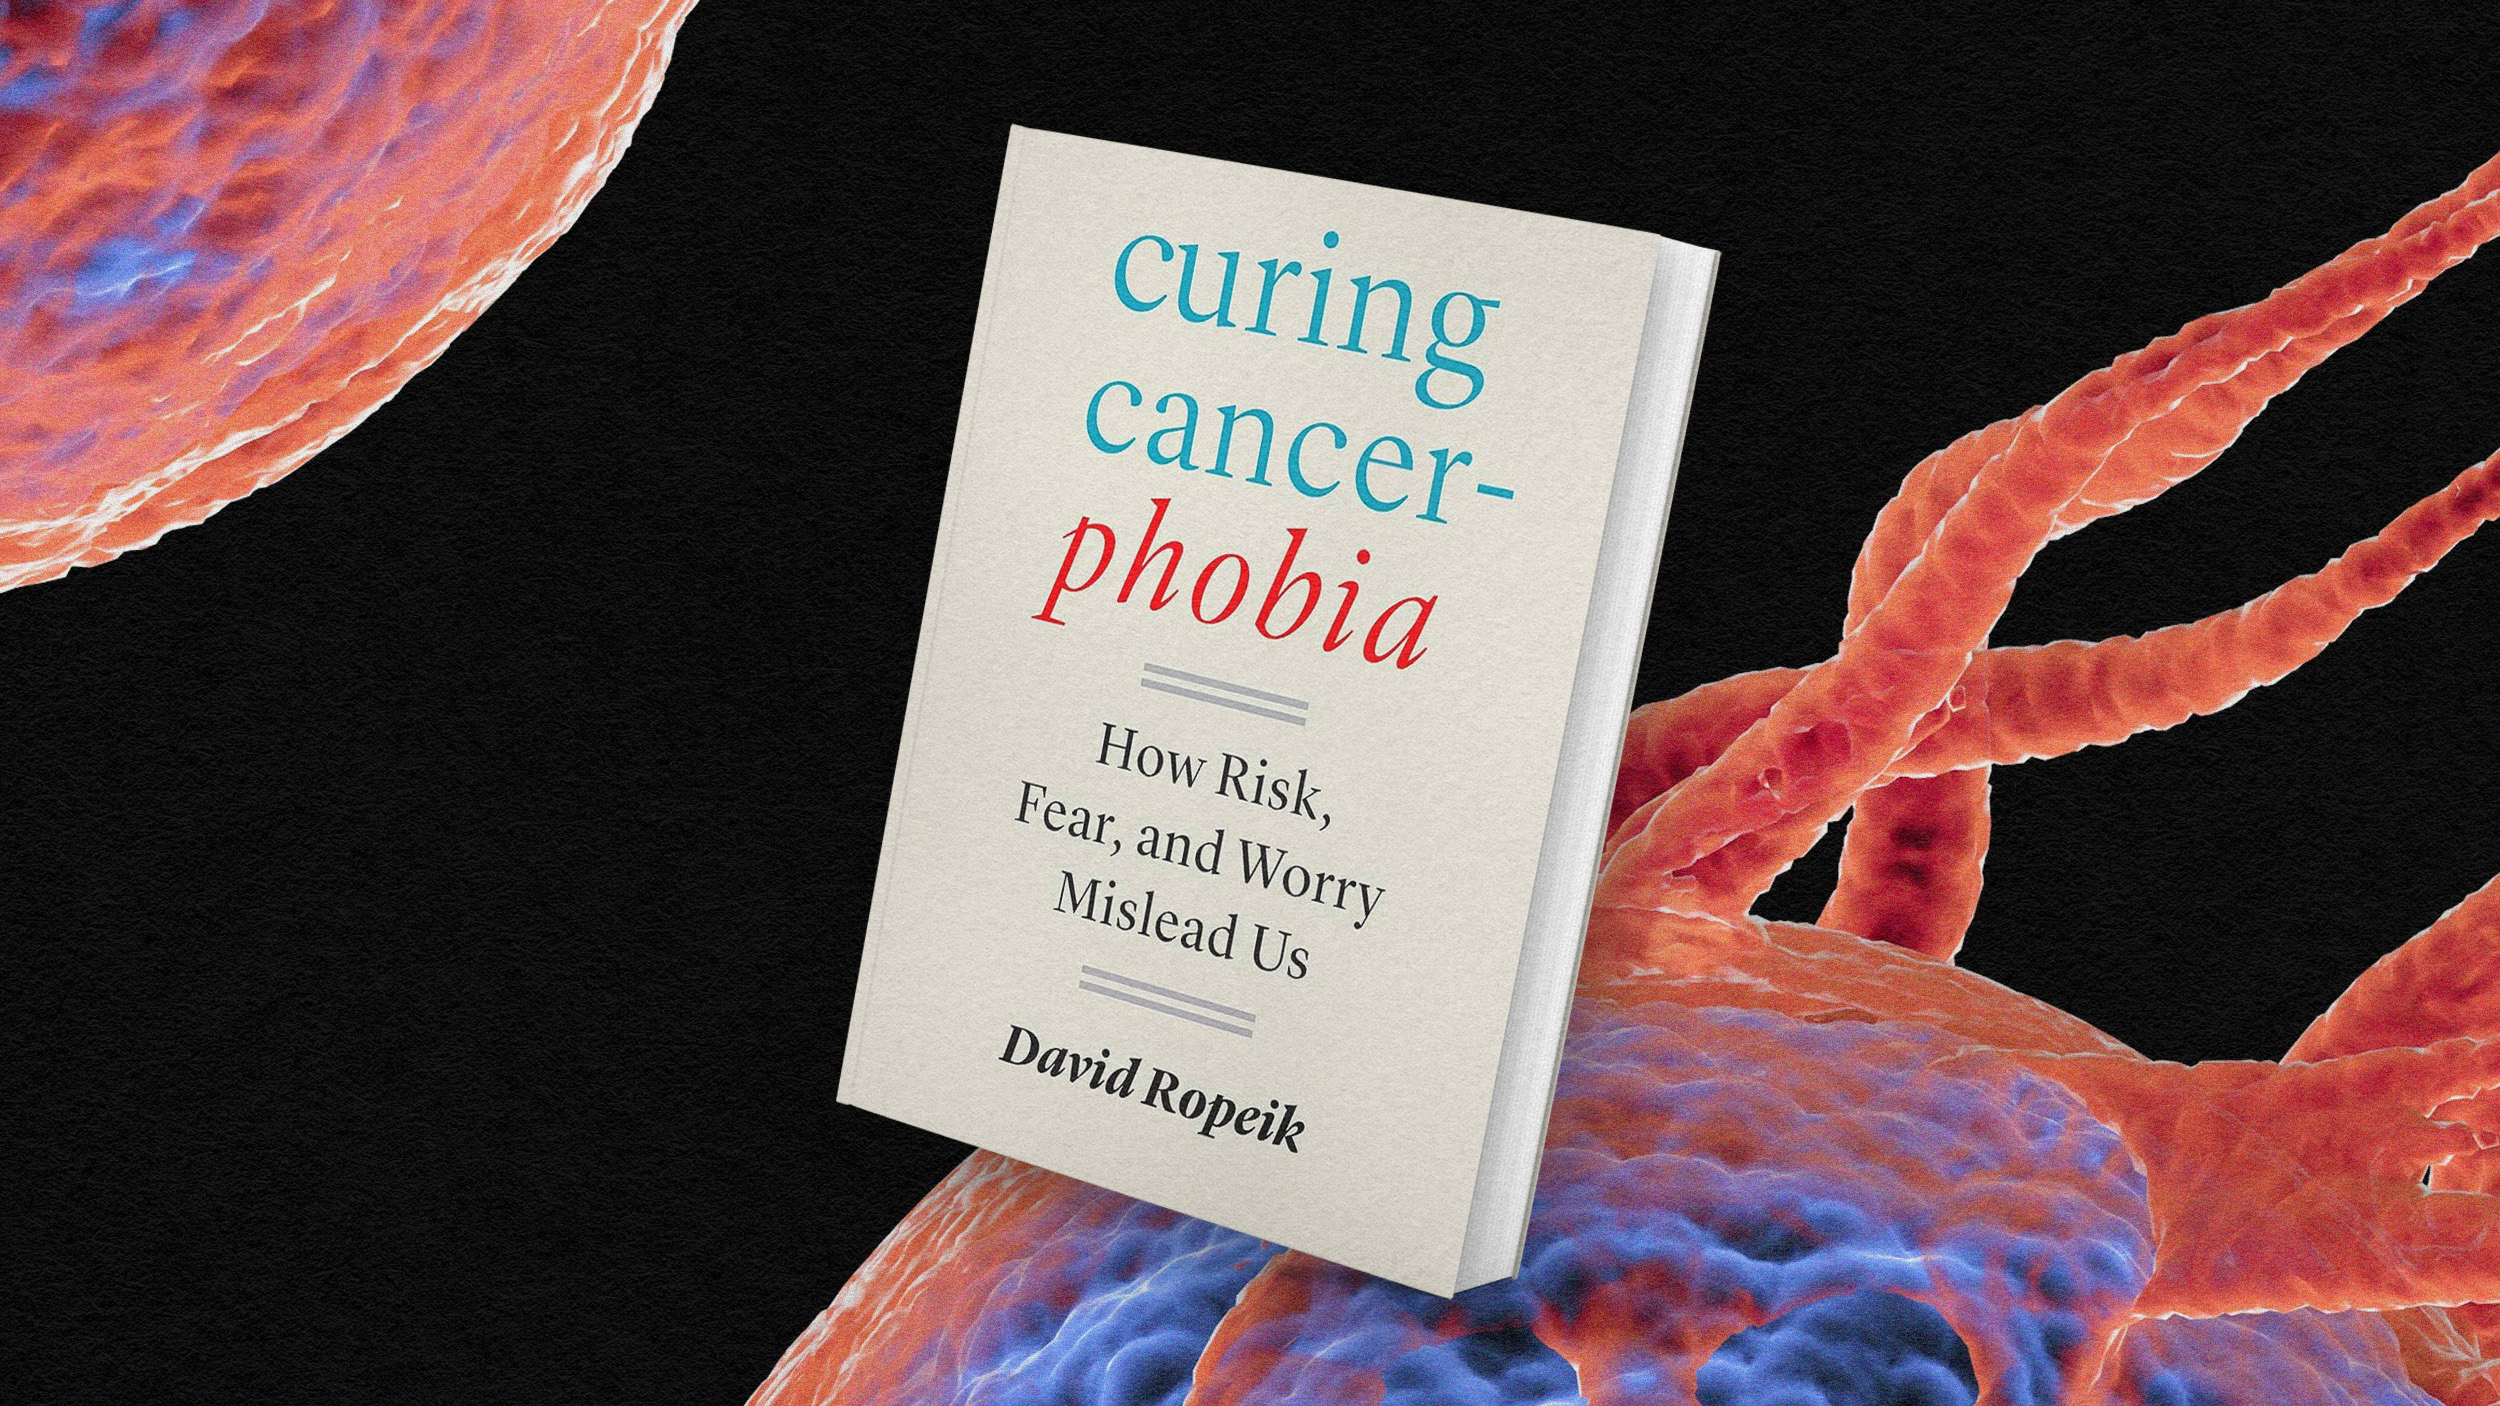 A book titled 'curing cancer phobia' that addresses cancerphobia.